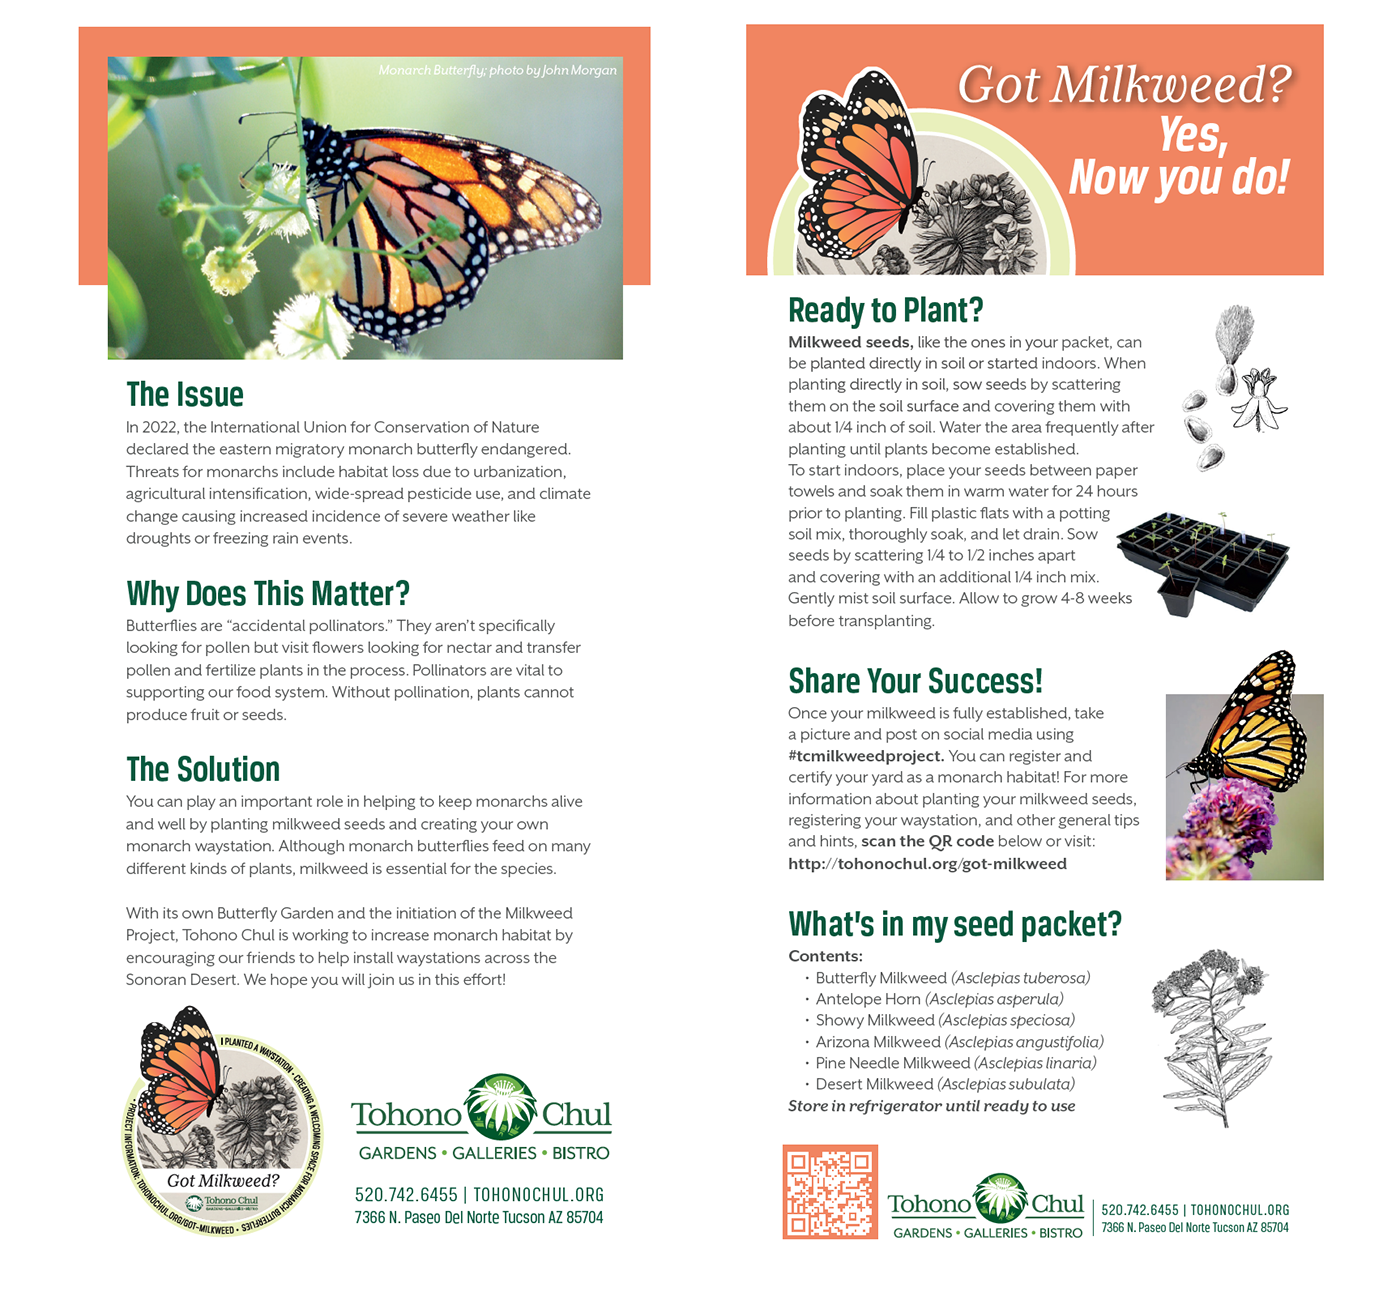 Branding design identity logo packagedesign butterfly pollinators conservation campaign appeal